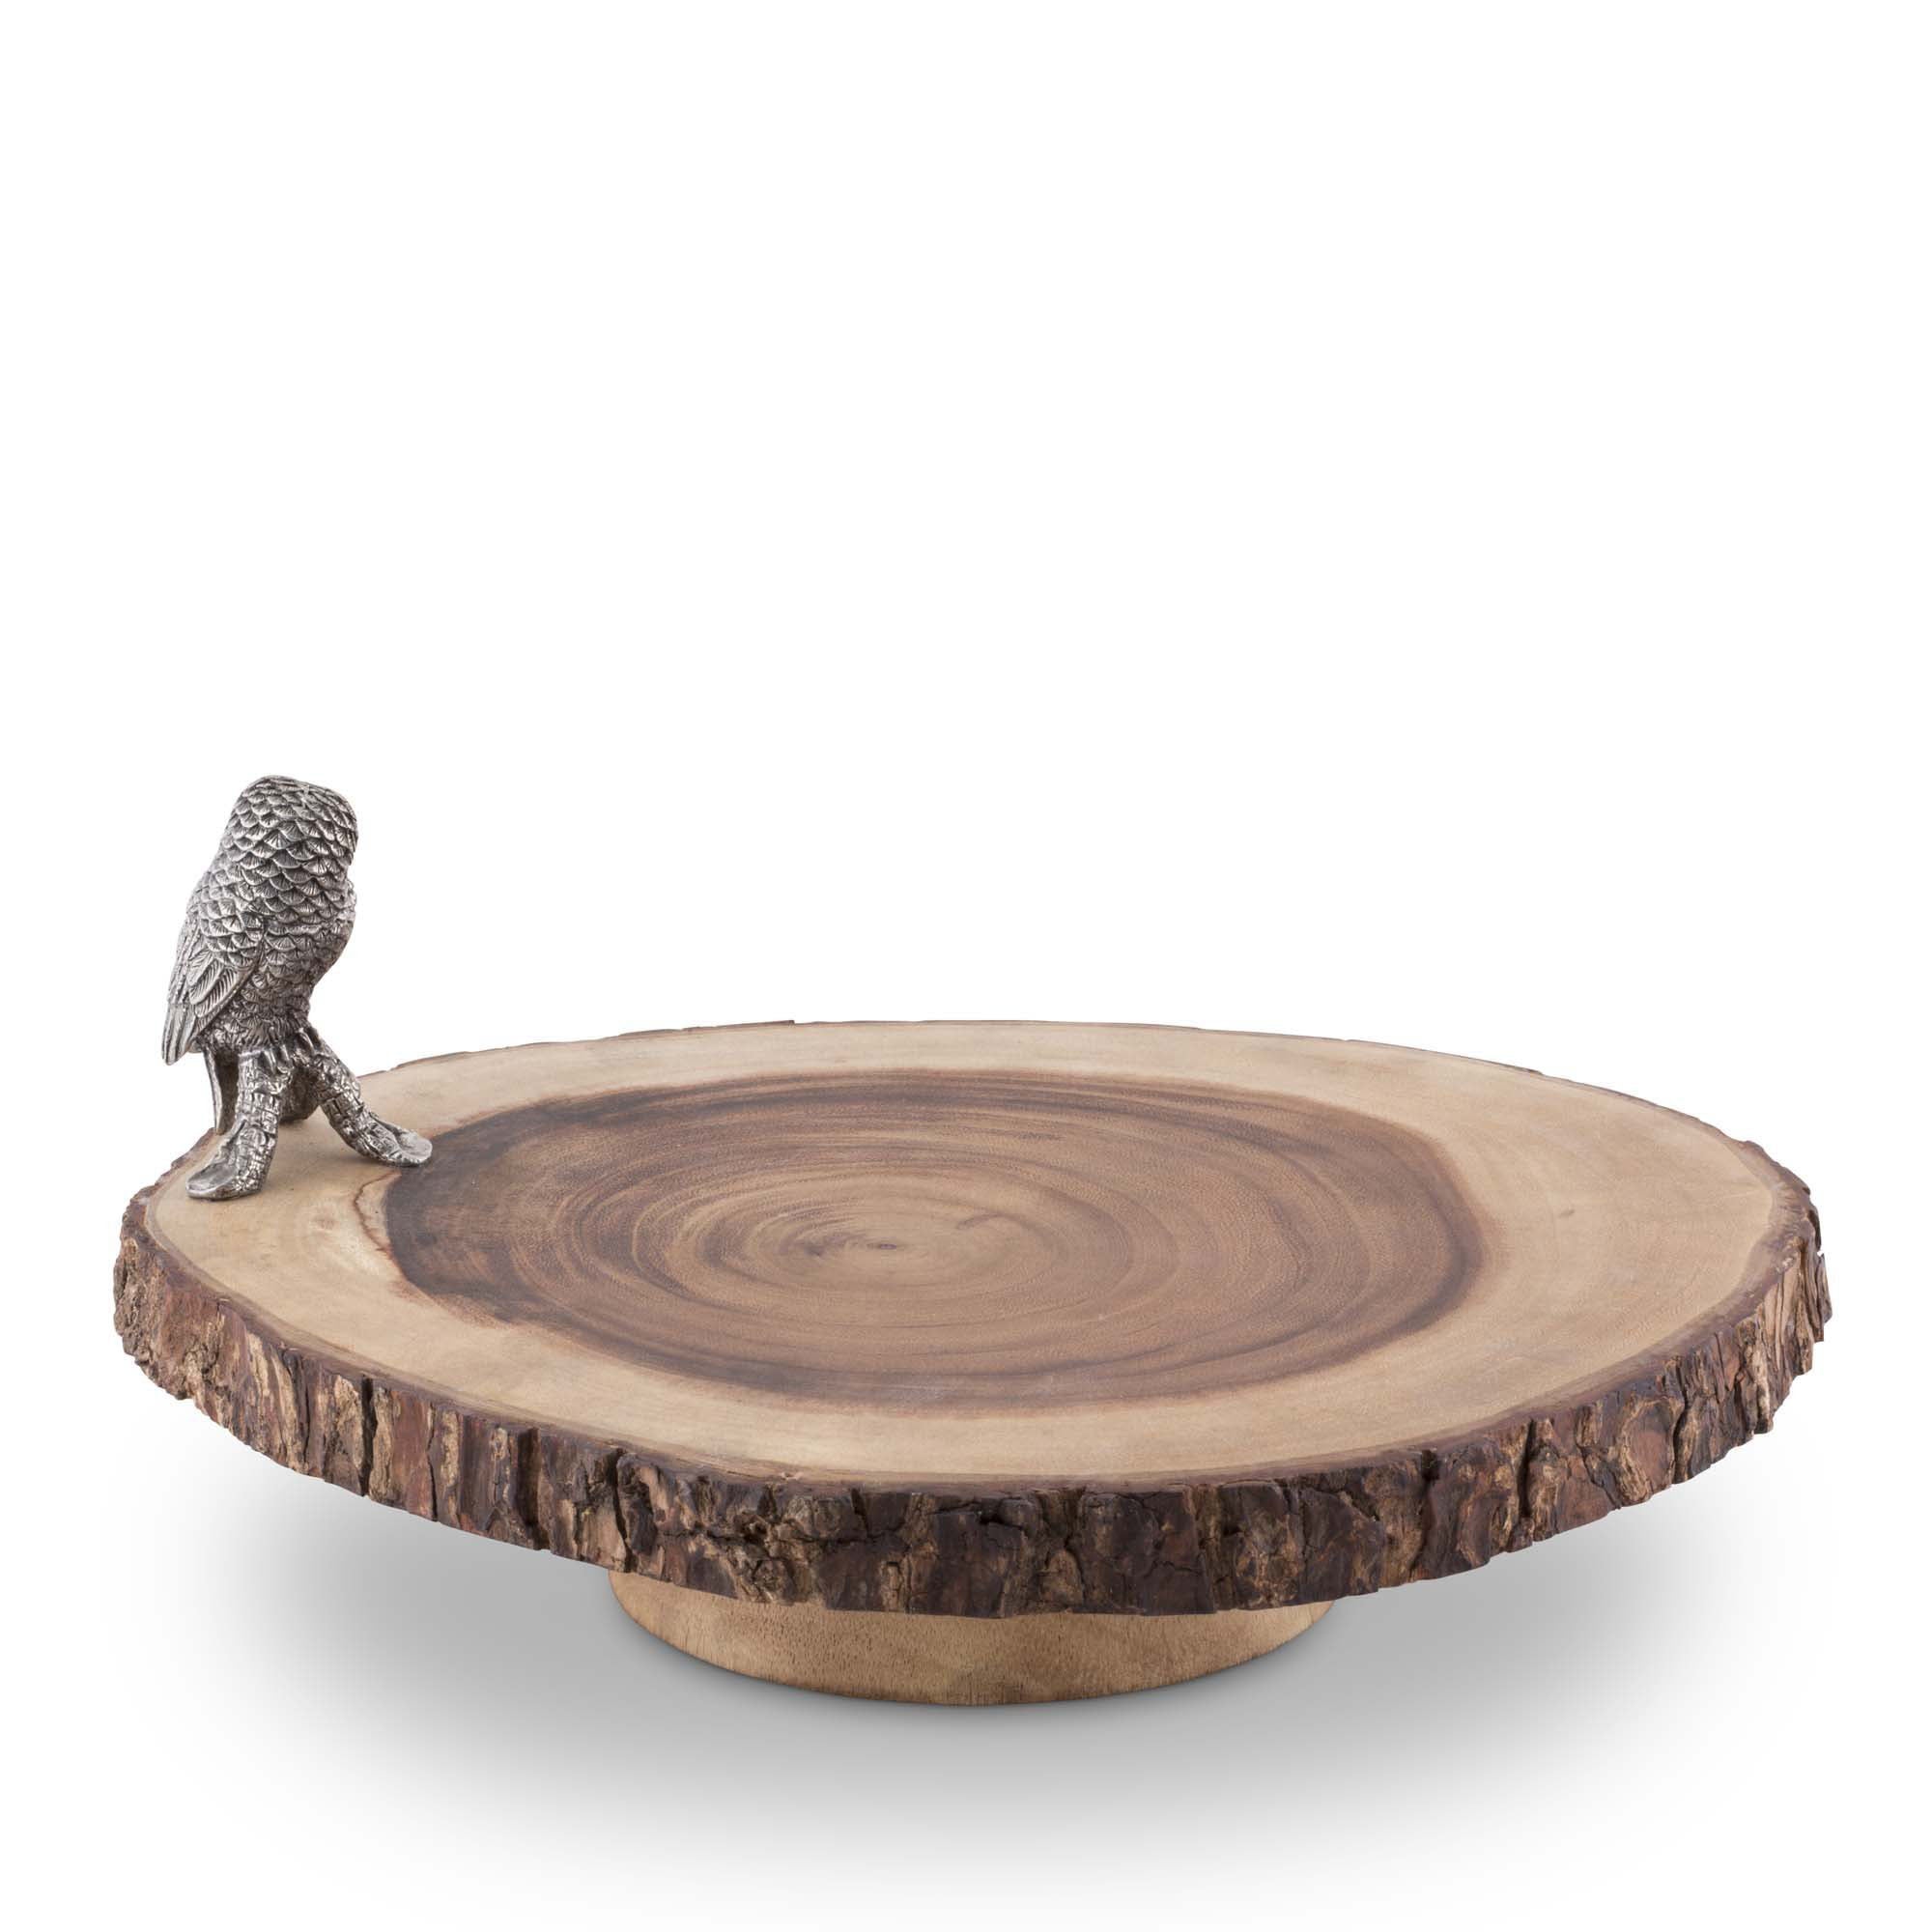 Vagabond House Owl Cheese Stand Product Image